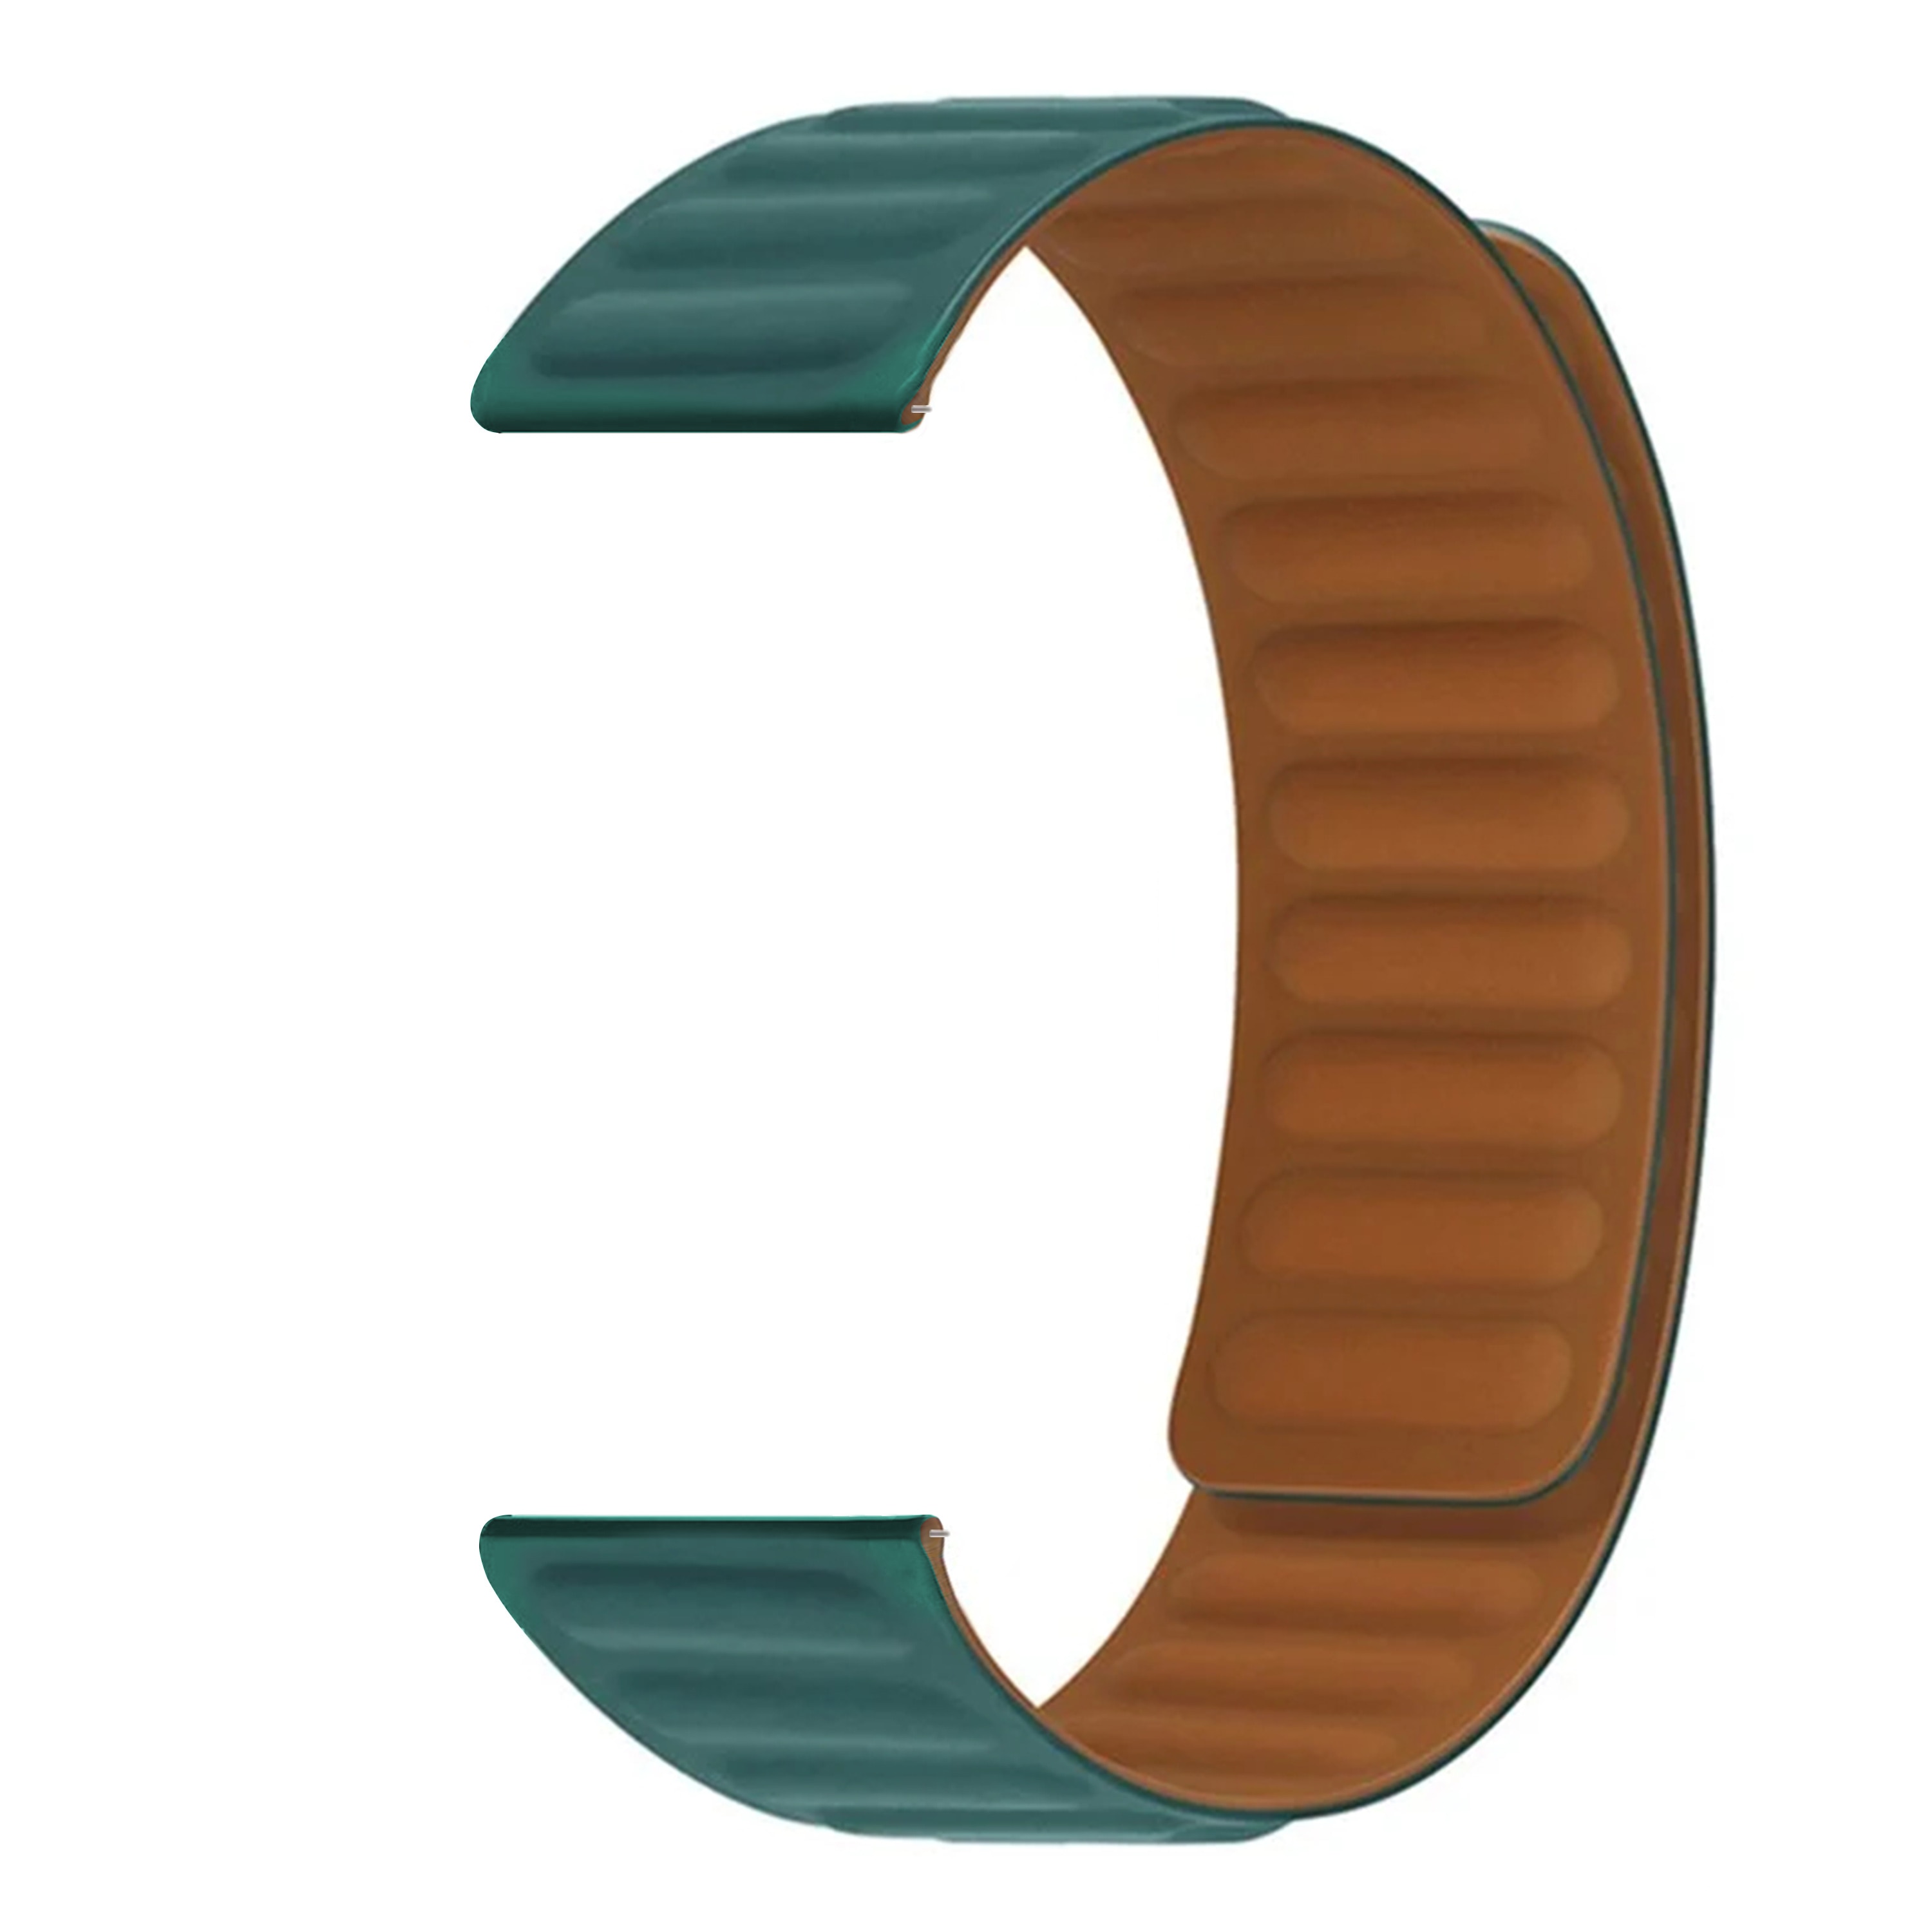 Hama Fit Watch 4900 Magnetic Silicone Band Green